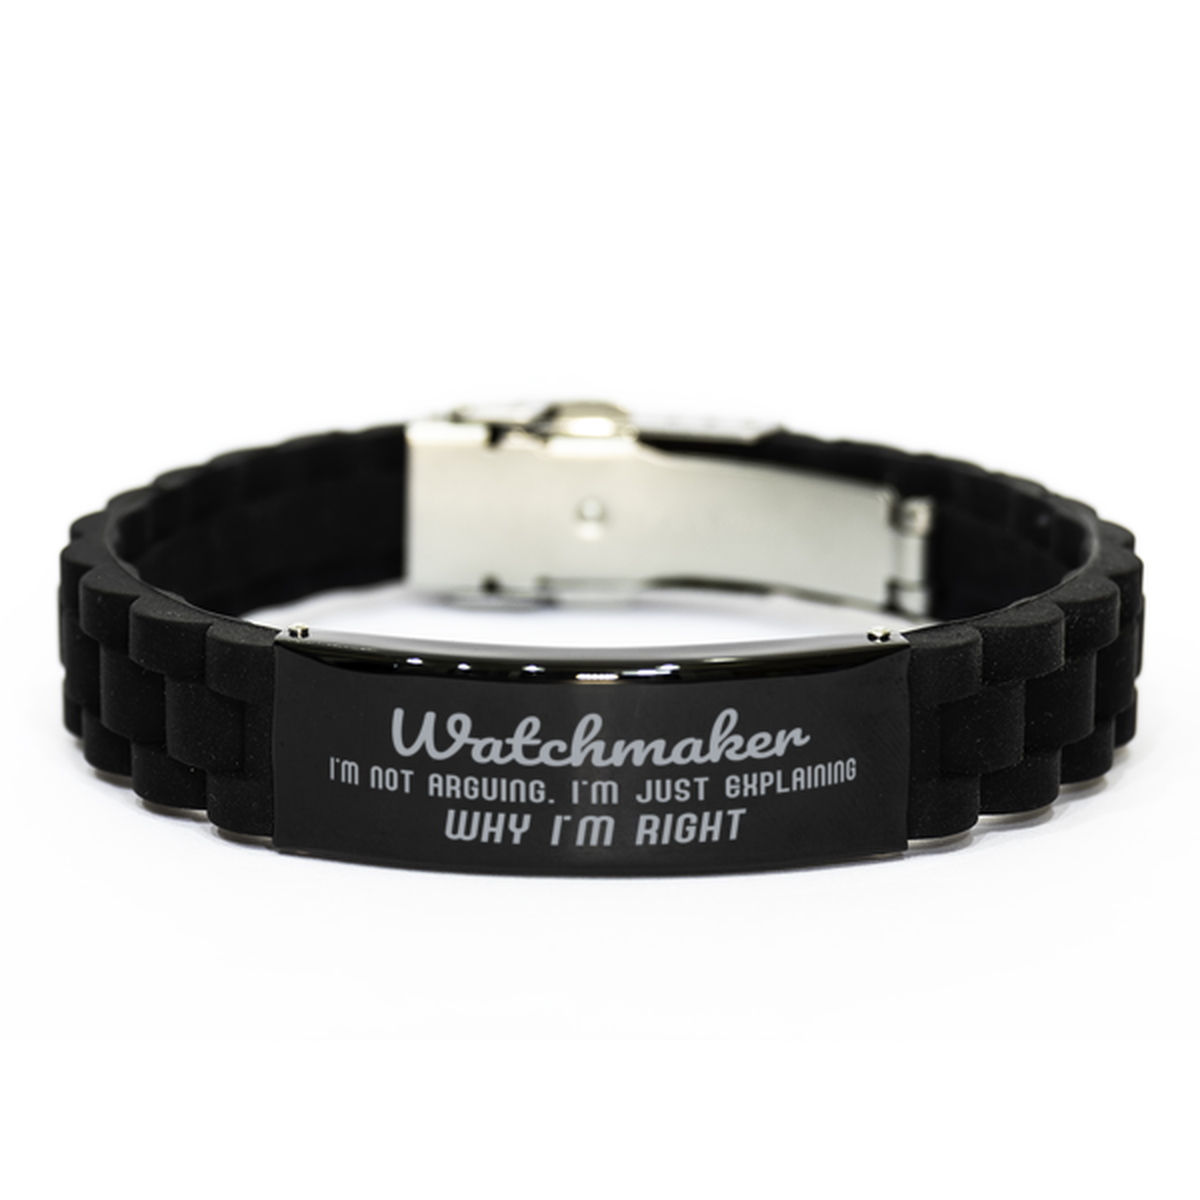 Watchmaker I'm not Arguing. I'm Just Explaining Why I'm RIGHT Black Glidelock Clasp Bracelet, Funny Saying Quote Watchmaker Gifts For Watchmaker Graduation Birthday Christmas Gifts for Men Women Coworker